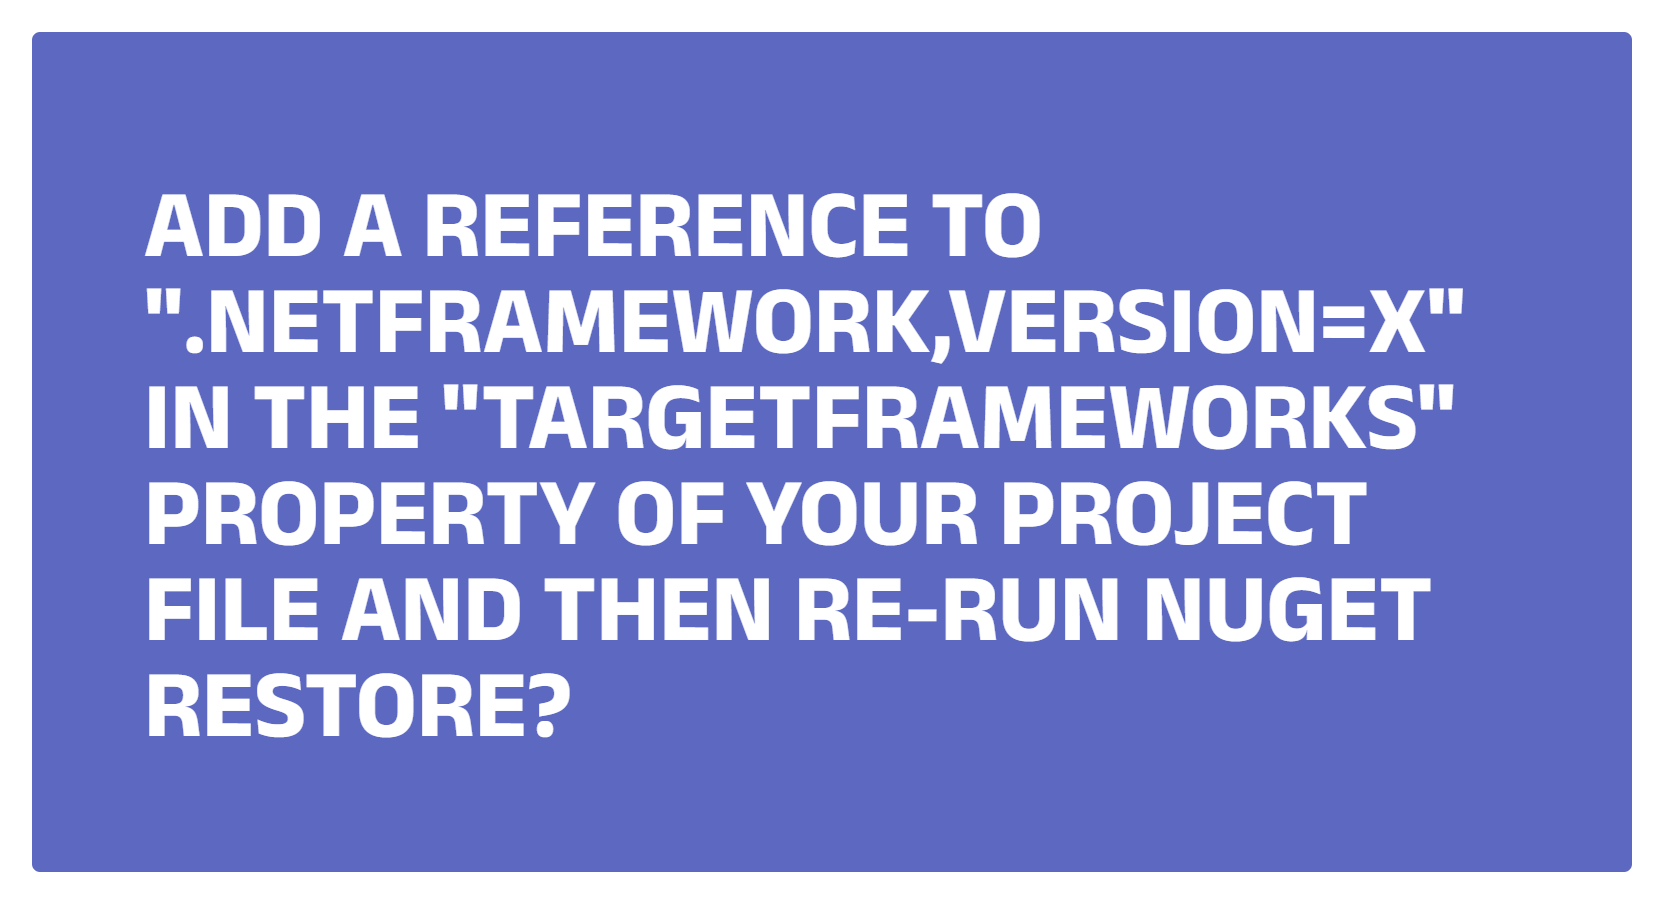 Add a reference to ".NETFramework,Version=x" in the "TargetFrameworks" property of your project file and then re-run NuGet restore?